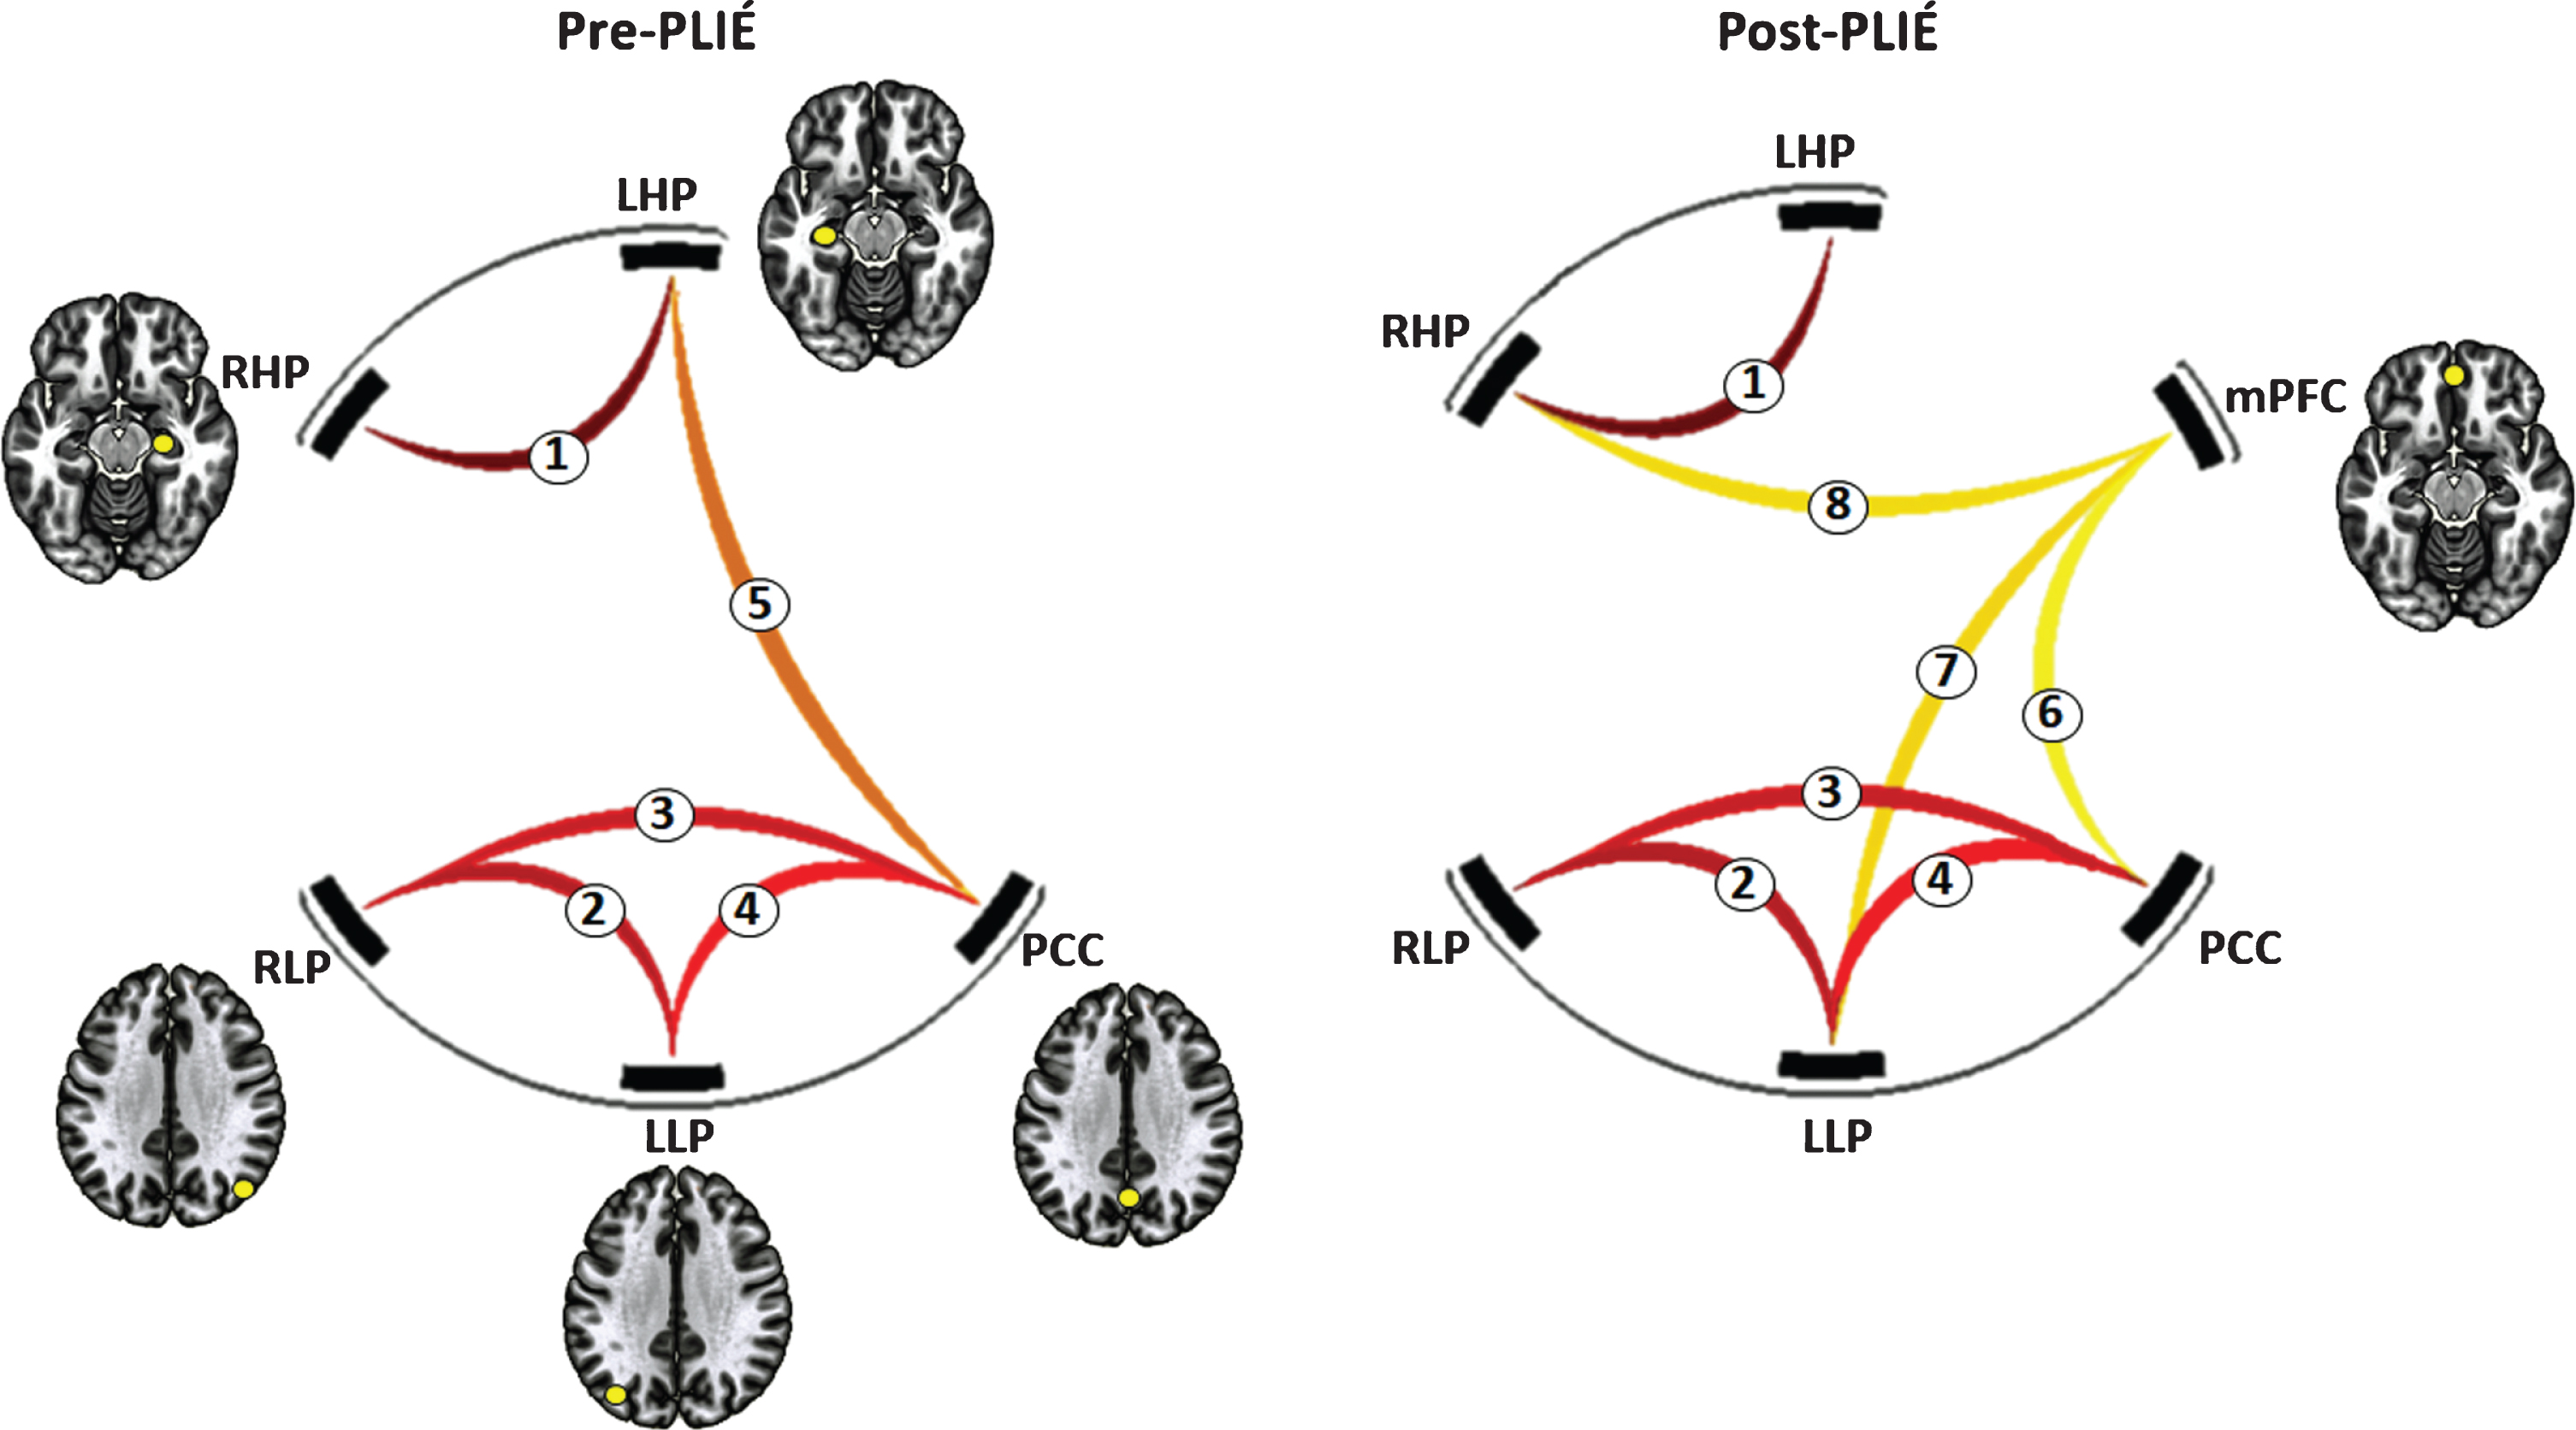 Change in default mode network (DMN) connectivity before and after PLIÉ. The numbers on the connections correspond to numbers denoting the connections in Table 2. RHP, right hippocampus; LHP, left hippocampus; RLP, right lateral parietal; LLP, left lateral parietal; PCC, posterior cingulate cortex; mPFC, medial prefrontal cortex.